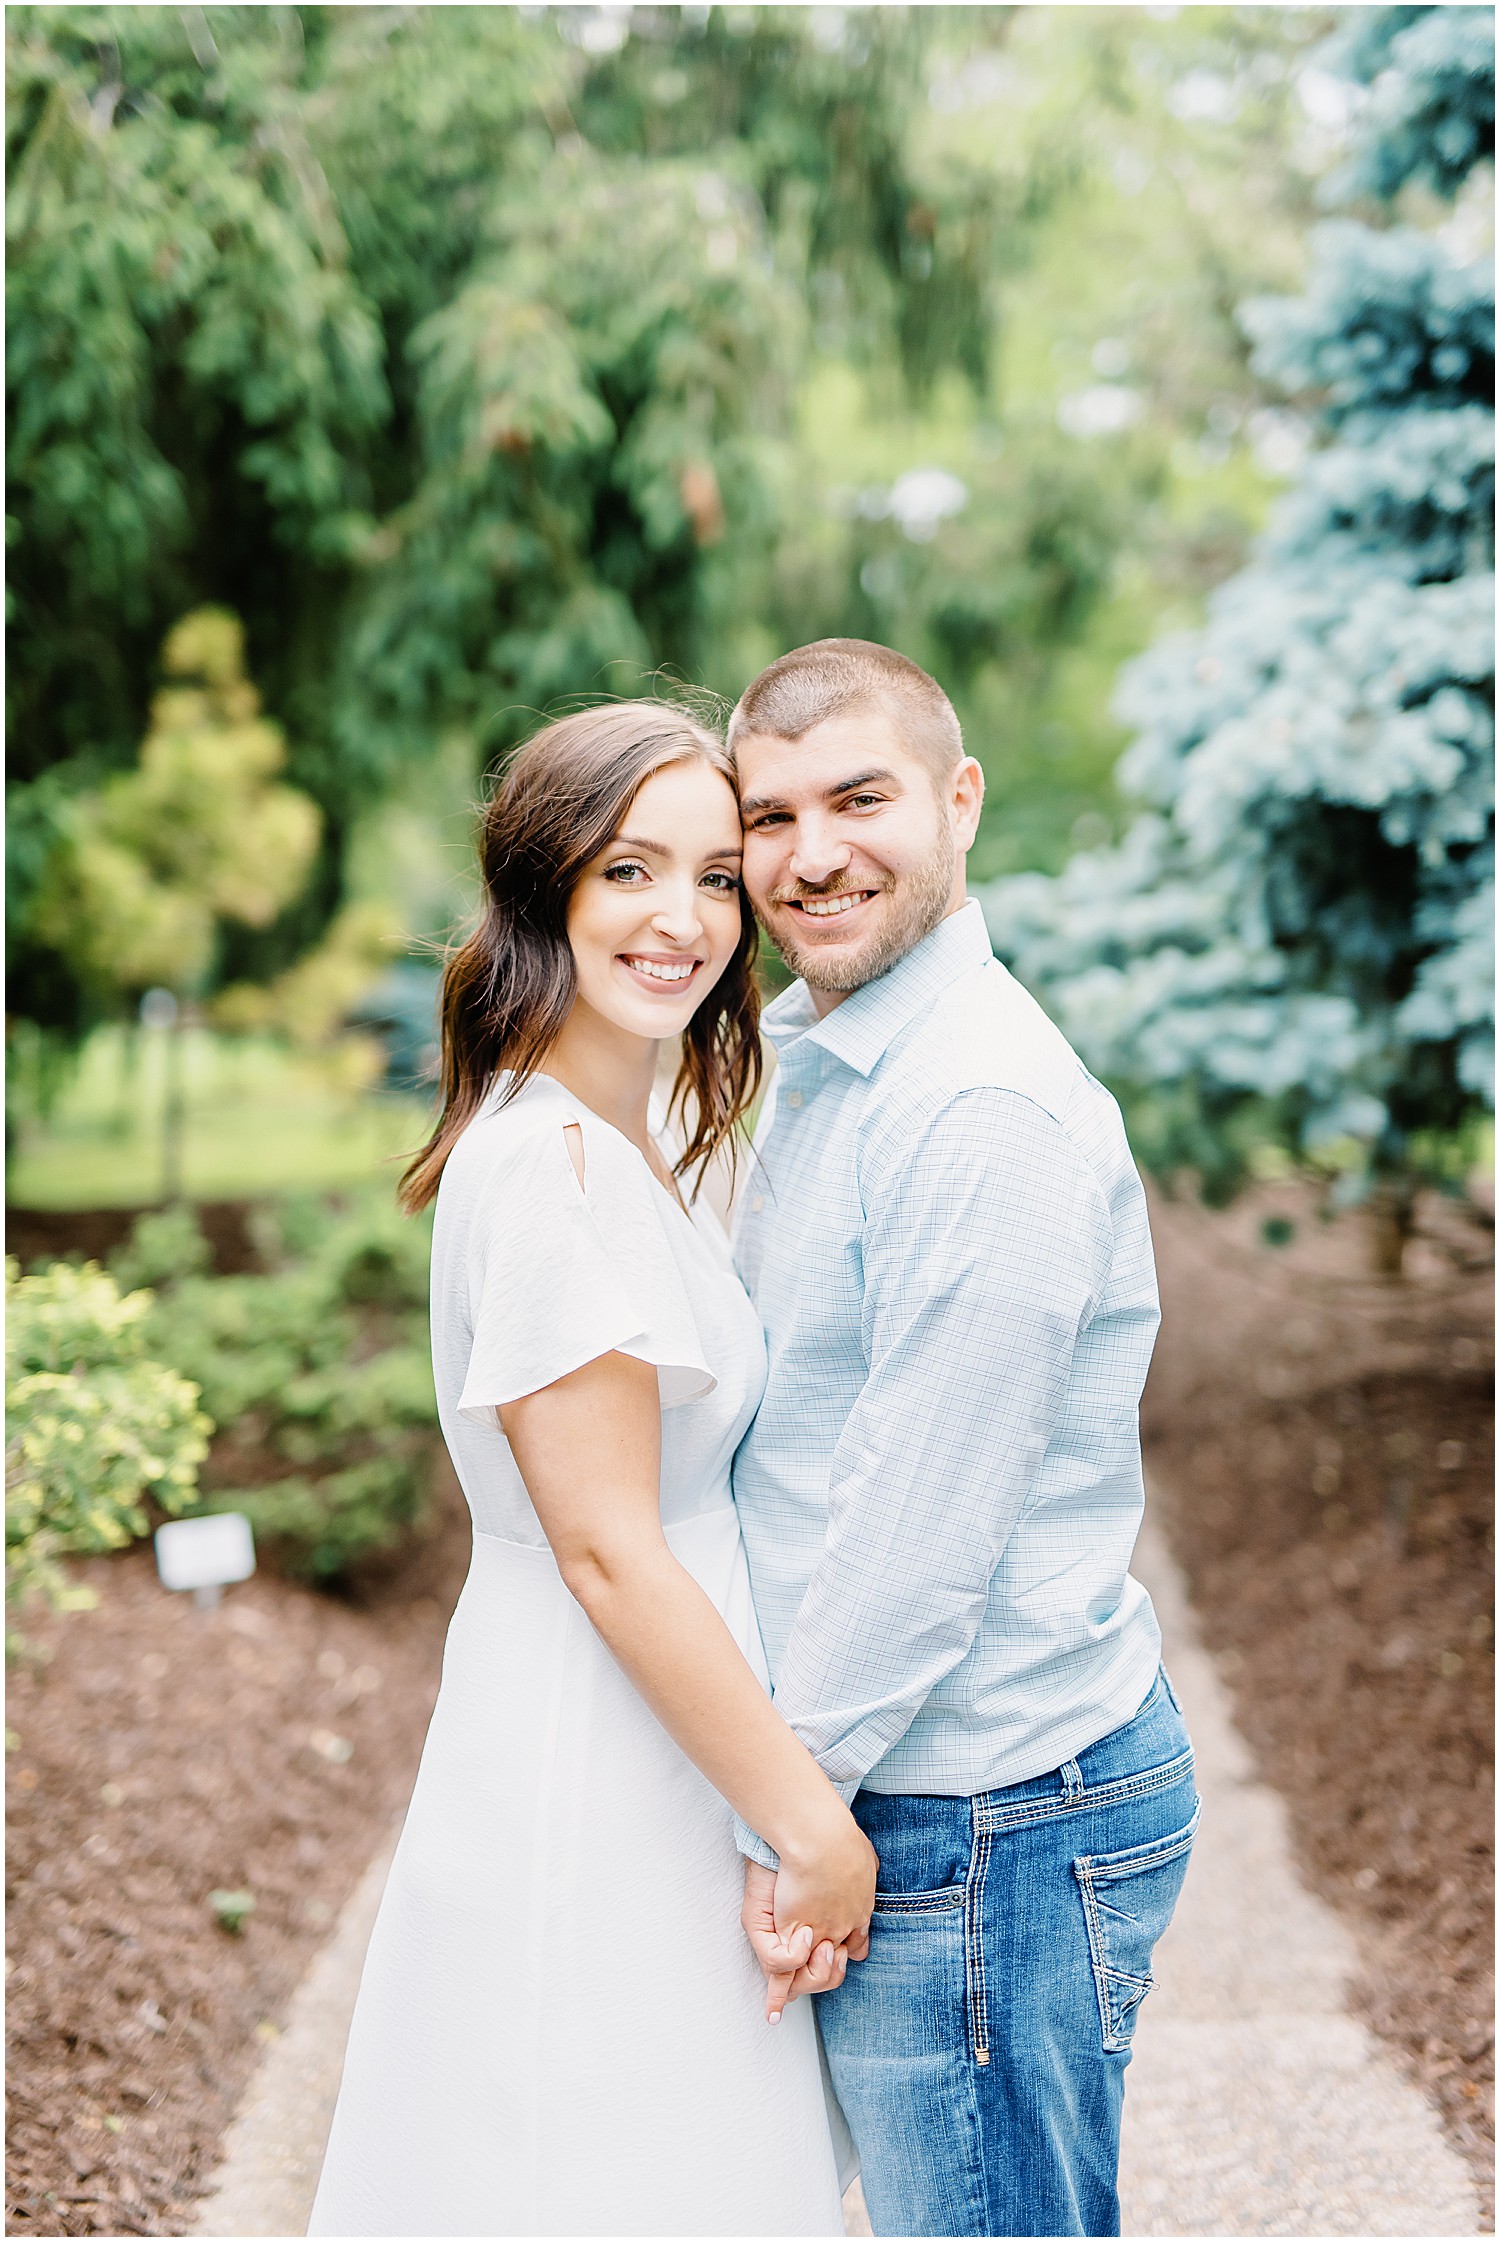 couple holding hands and smiling on a sidewalk under trees for engagement session at shelter gardens in columbia, mo